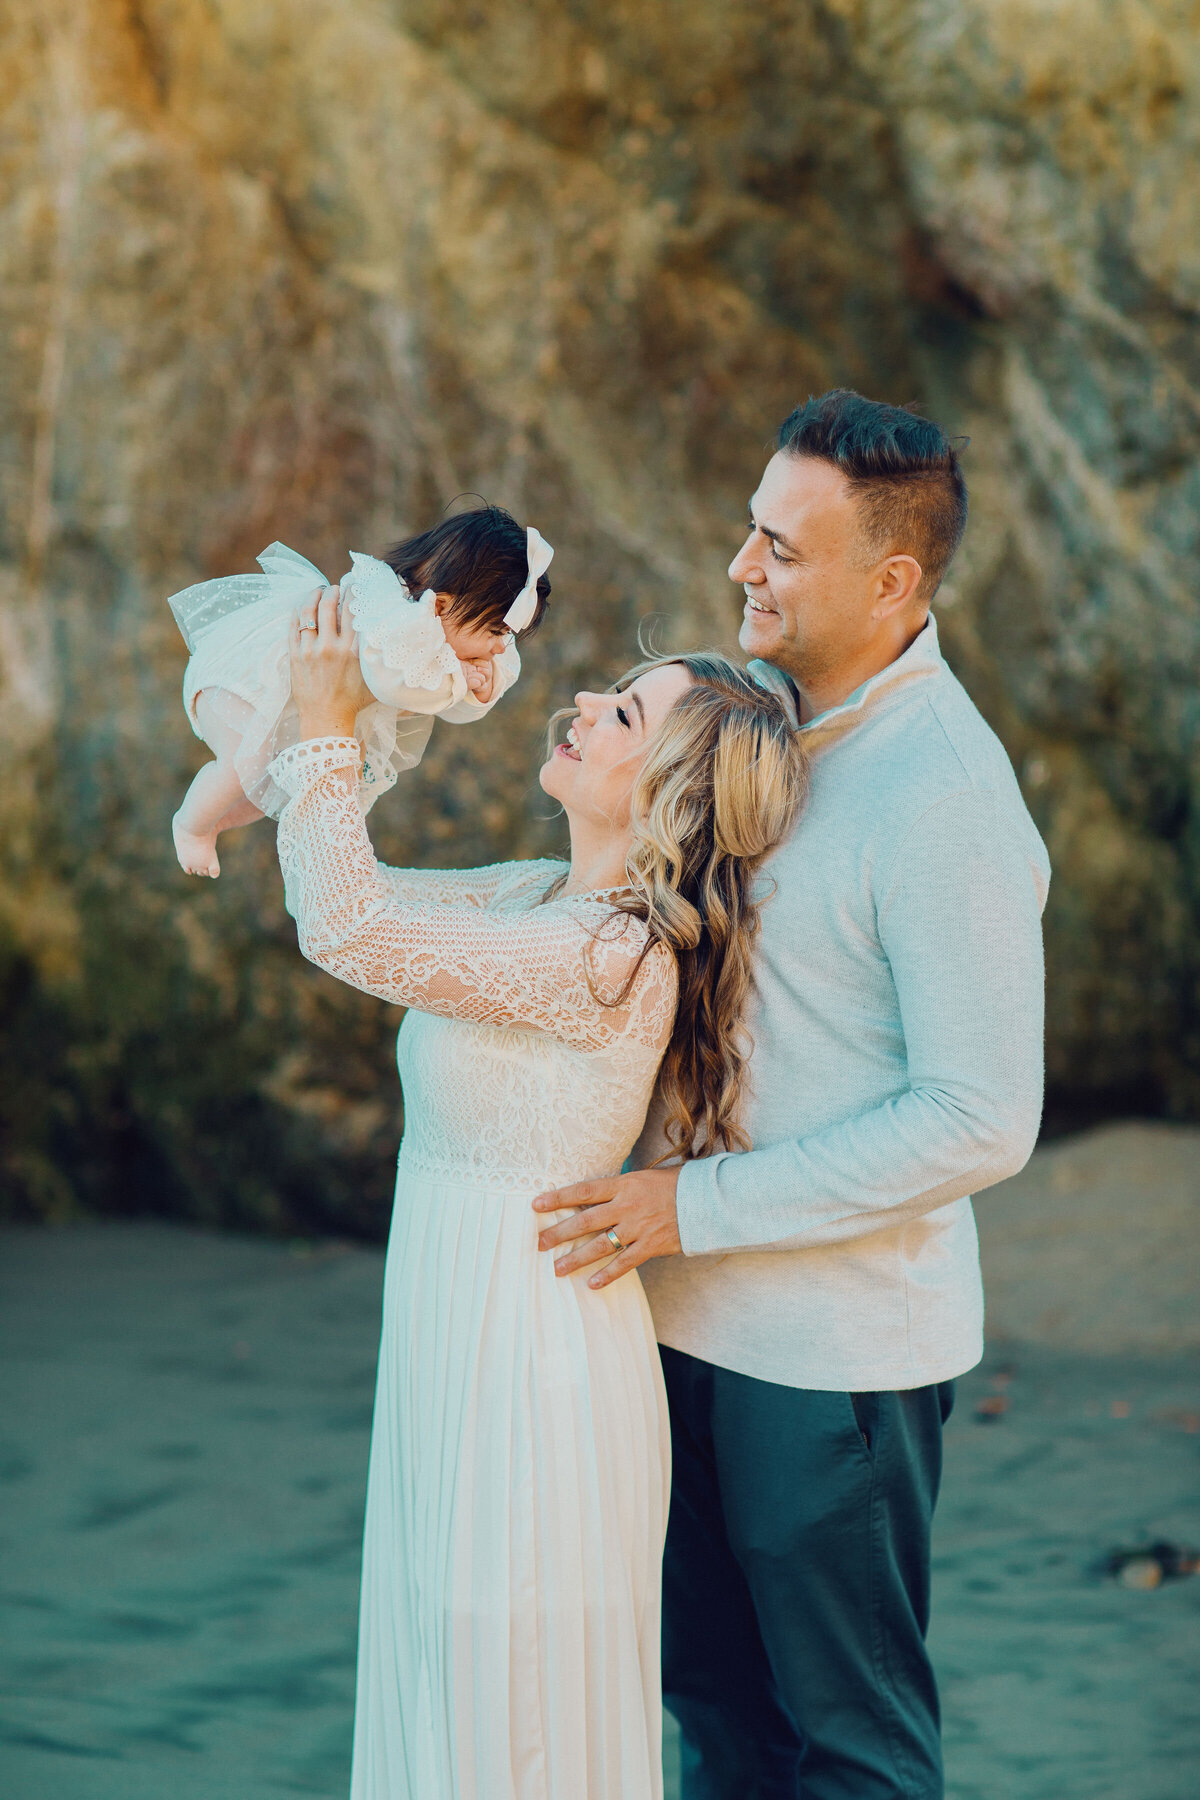 Family Portrait Photo Of Wife Carrying The Baby Beside Her Husband Los Angeles